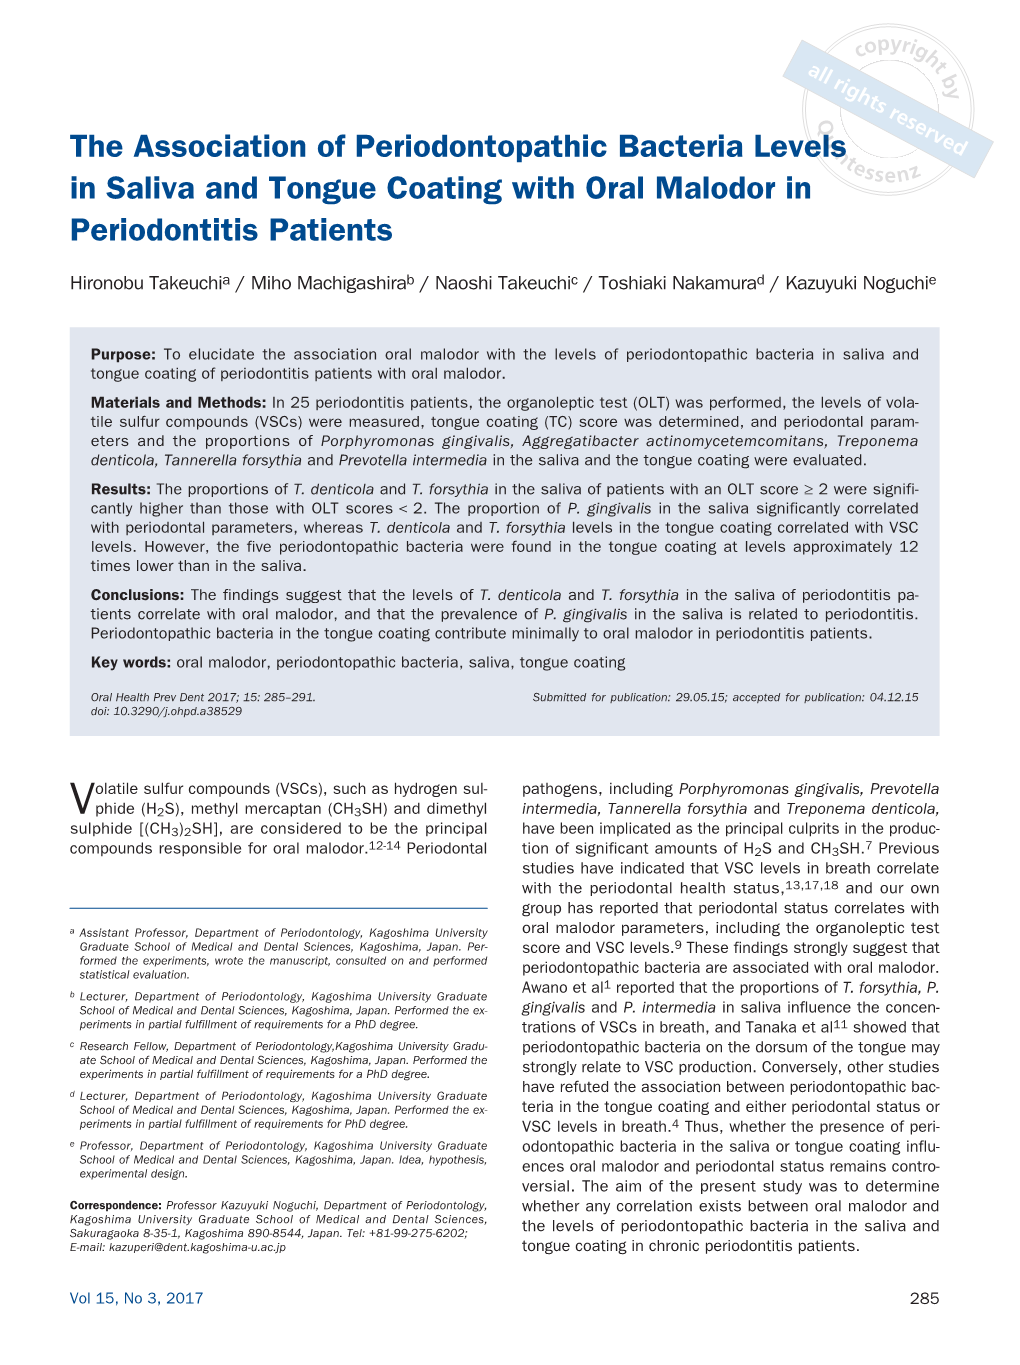 The Association of Periodontopathic Bacteria Levels in Saliva and Tongue Coating with Oral Malodor in Periodontitis Patients